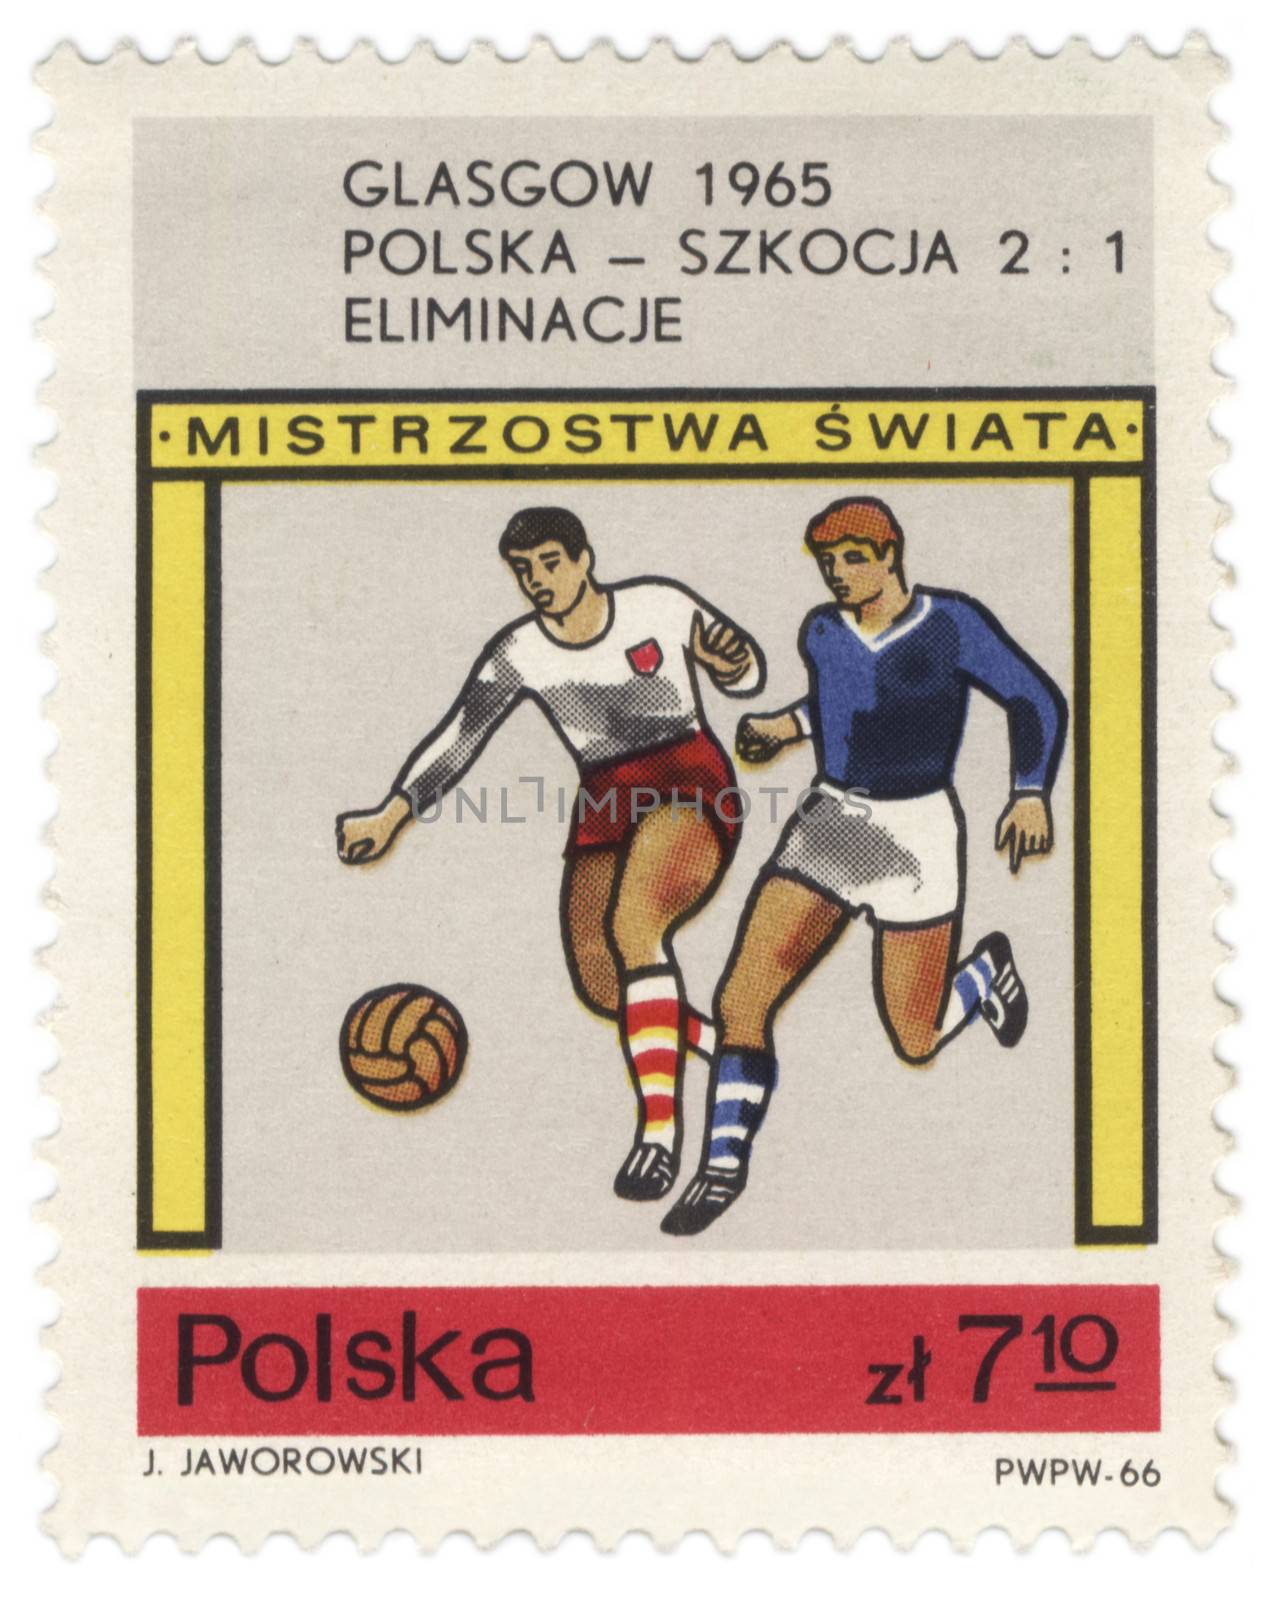 POLAND - CIRCA 1966: A post stamp printed in Poland devoted to the FIFA World Cup in London-1966, shows Qualifying Poland, Scotland, Glasgow-1965, circa 1966